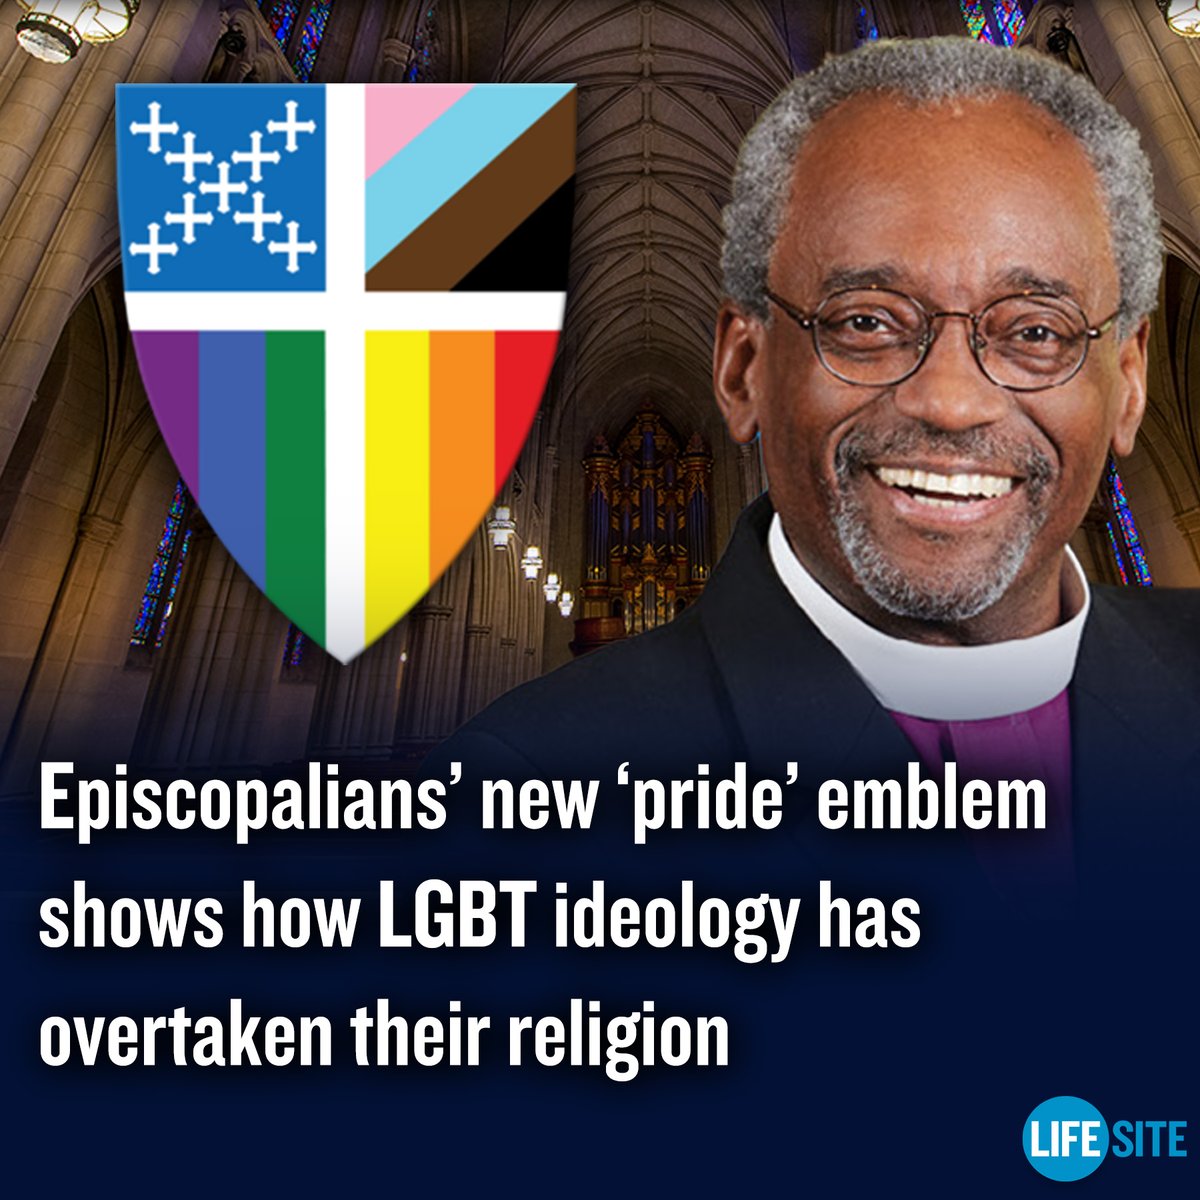 With 75% of Episcopalians’ new emblem devoted to ‘LGBTQ+’ ideology, Christ may soon be nothing more than a footnote for the dying – suicidal – Episcopal church. MORE: lifesitenews.com/blogs/episcopa… #Episcopalian #Church #LGBT #Faith #news